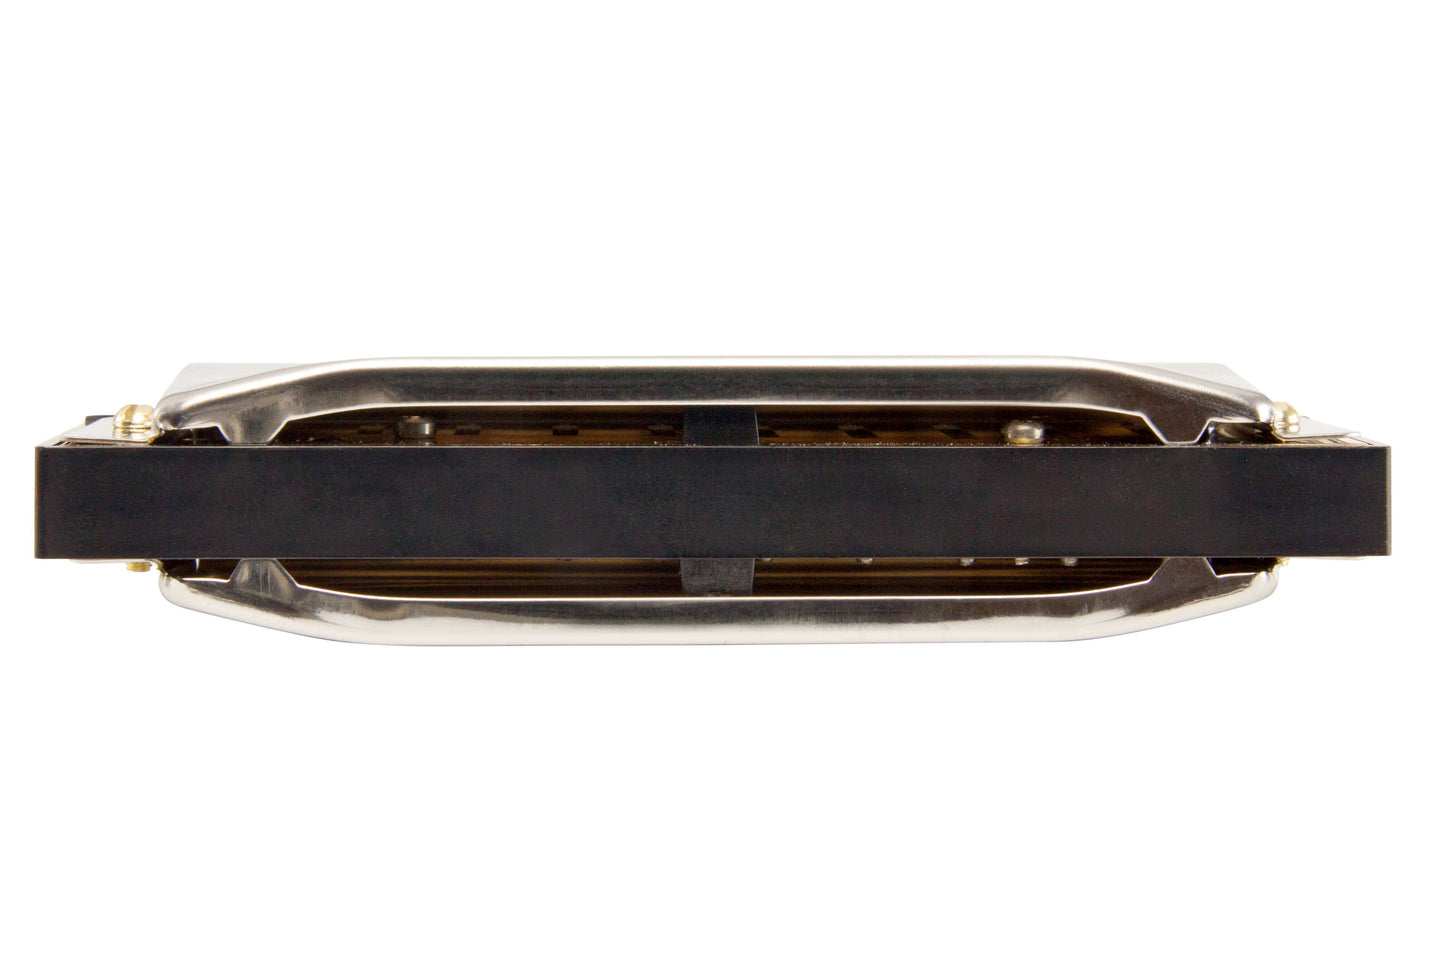 Hohner Special 20 Harmonica - Key of F